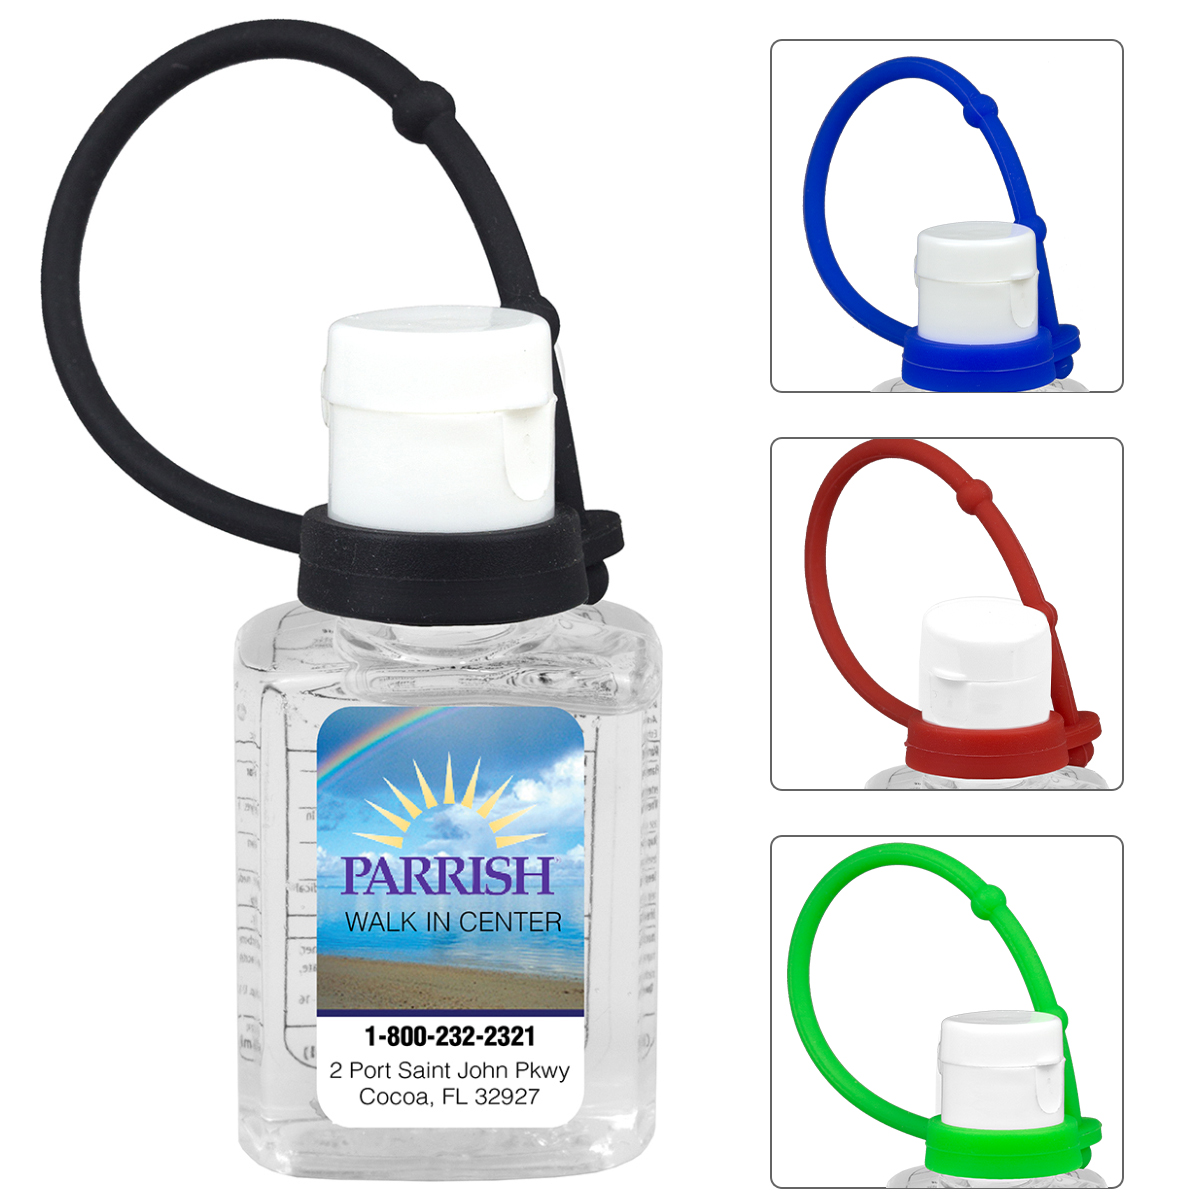 "SANPAL S" Connect 0.5 oz Compact Hand Sanitizer Antibacterial Gel in Flip-Top Squeeze Bottle with Colorful Silicone Leash